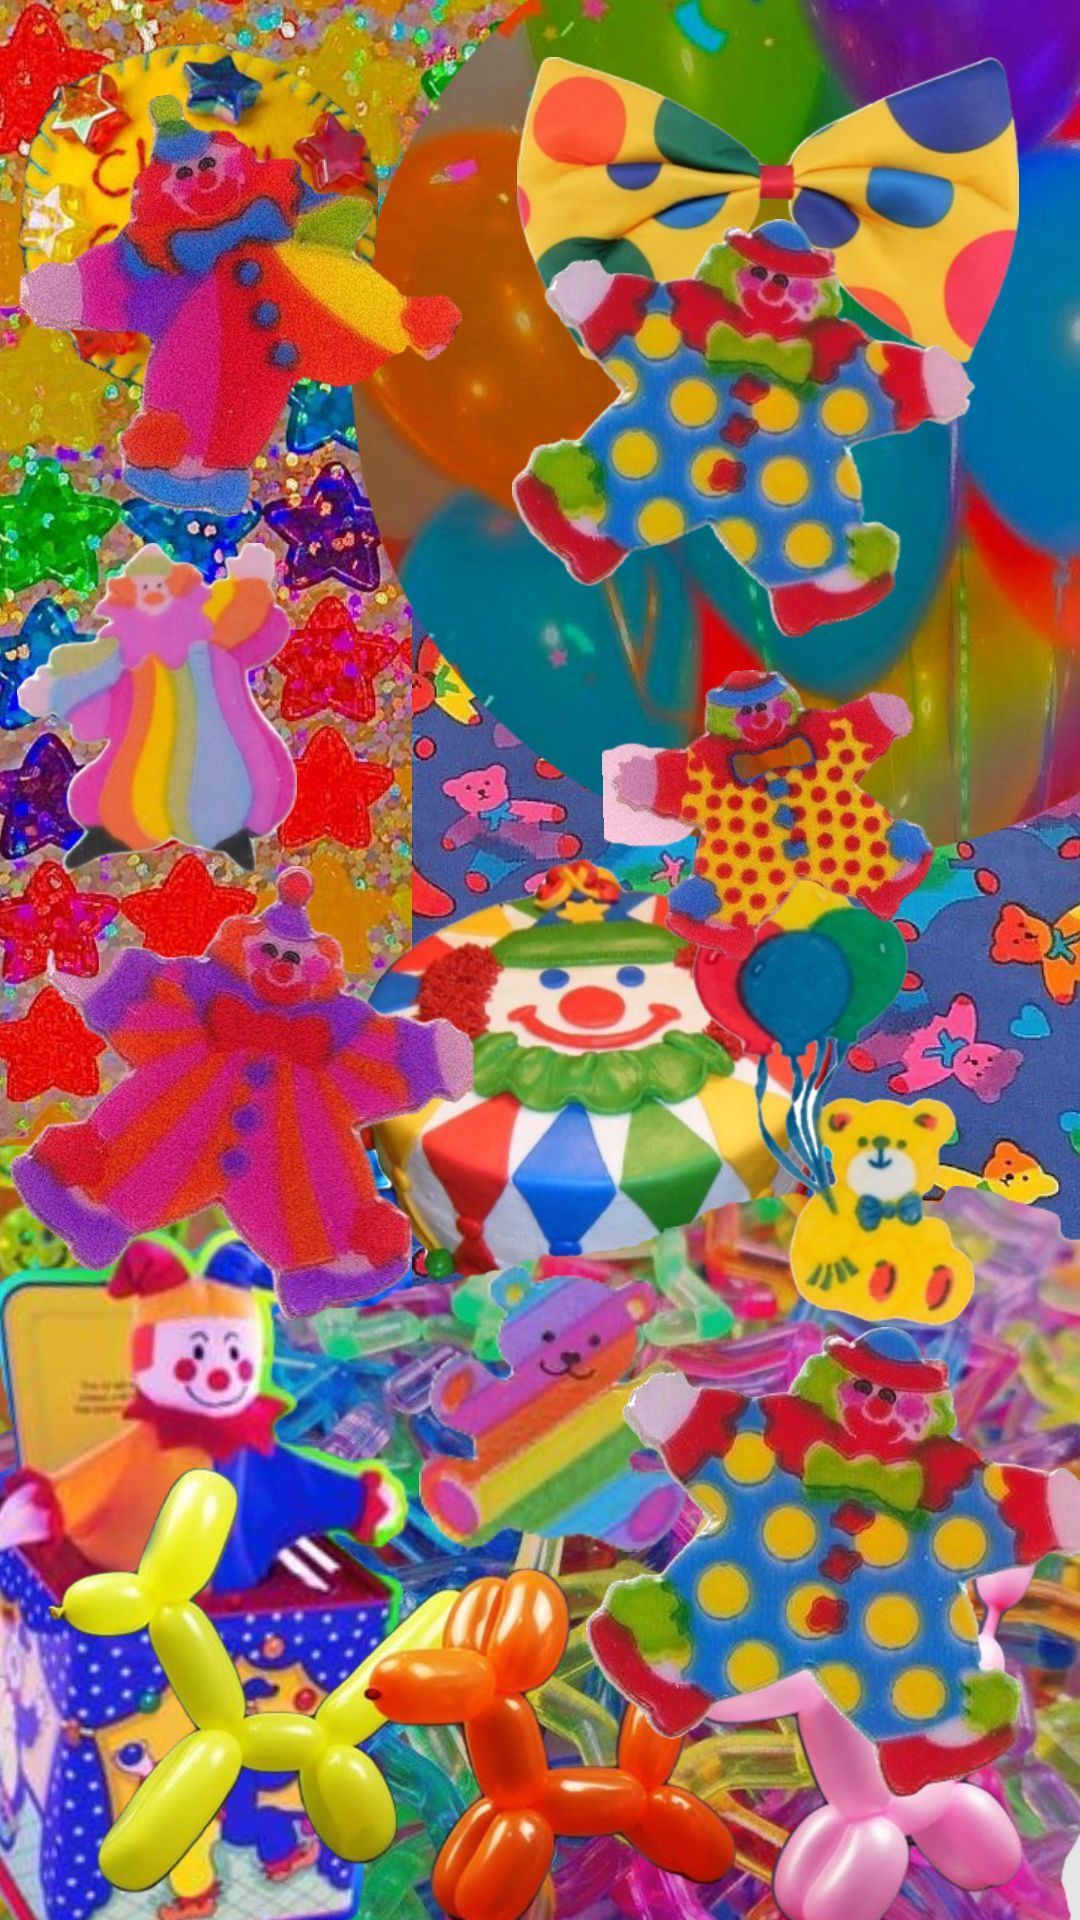 IPhone wallpaper with colorful circus balloons, clowns, and animals. - Clown, clowncore